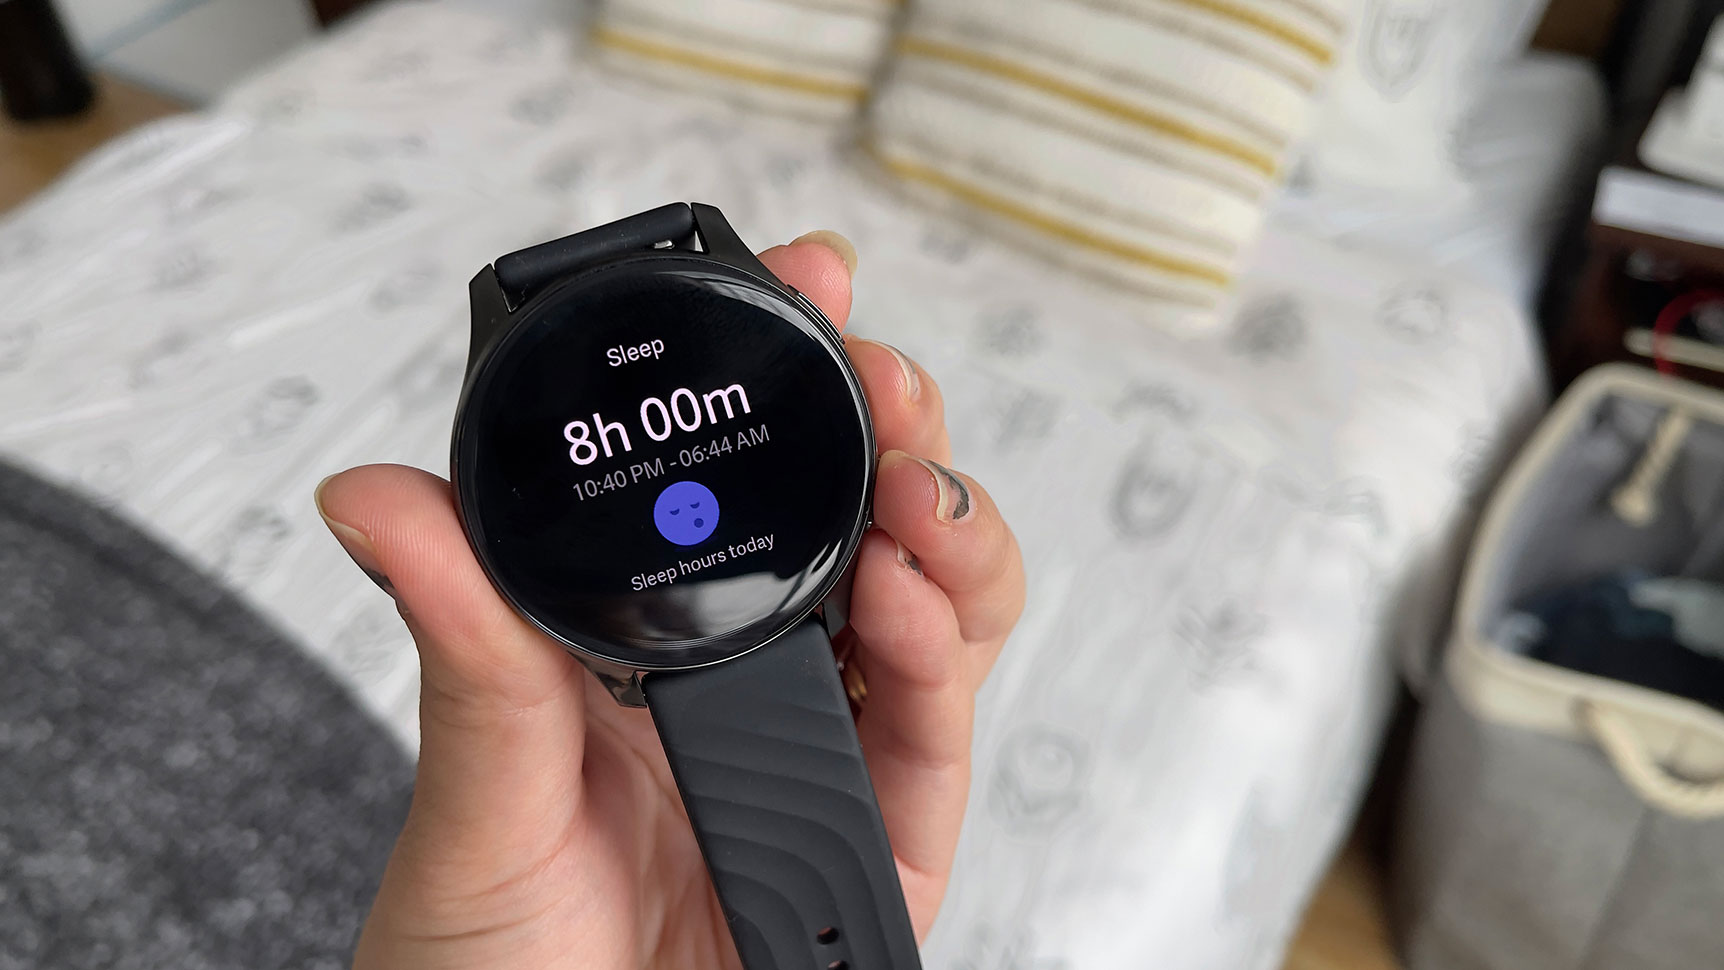  At launch, you can only track sleep on the wrist and you can't view historical data. (Photo: Victoria Song/Gizmodo)